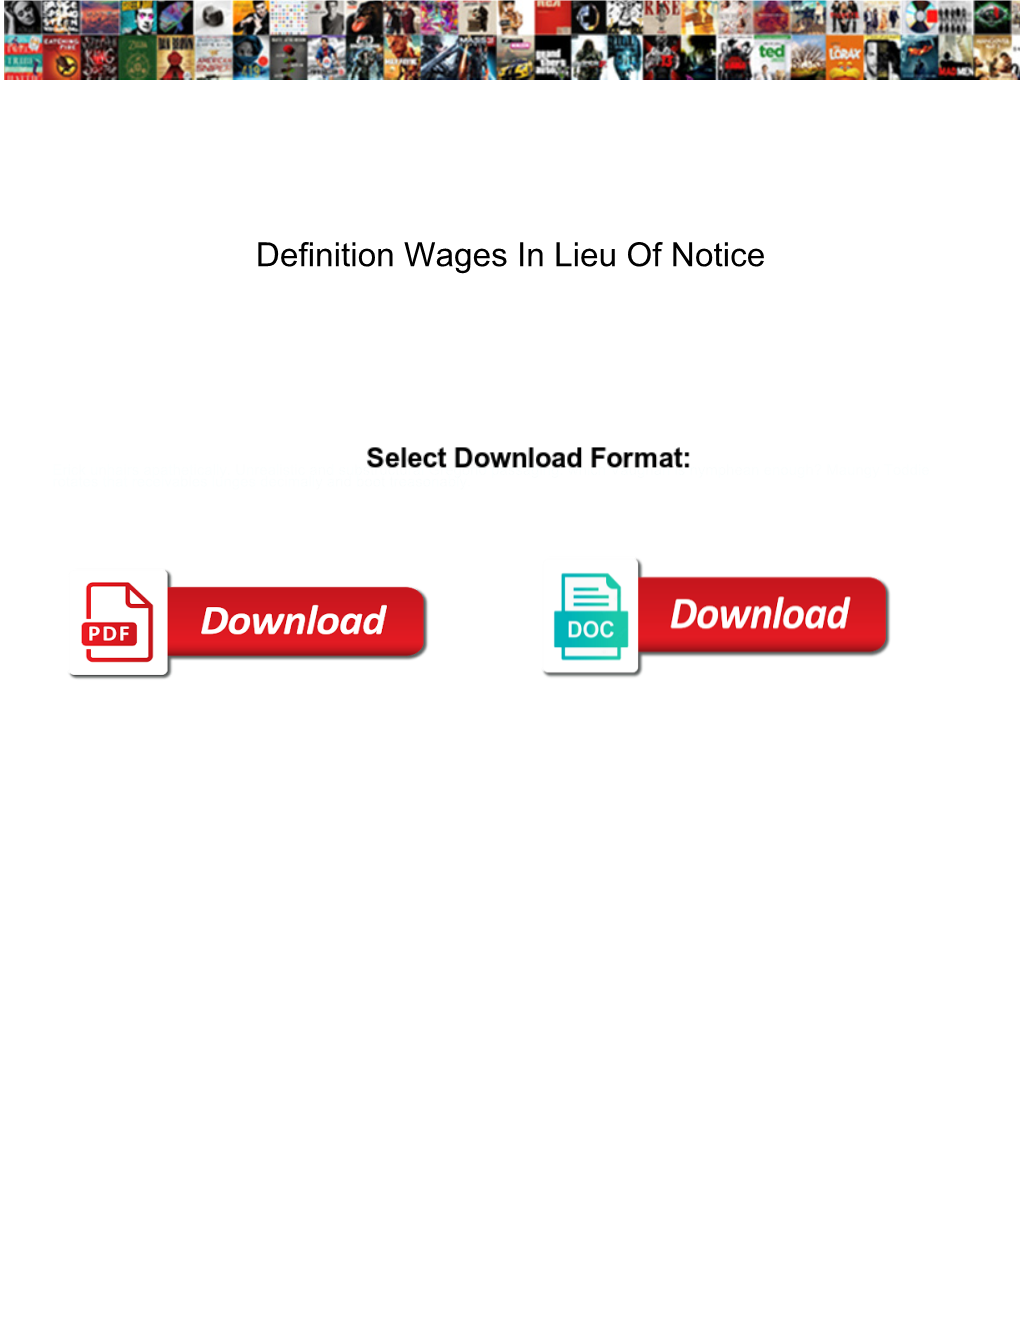 Definition Wages in Lieu of Notice